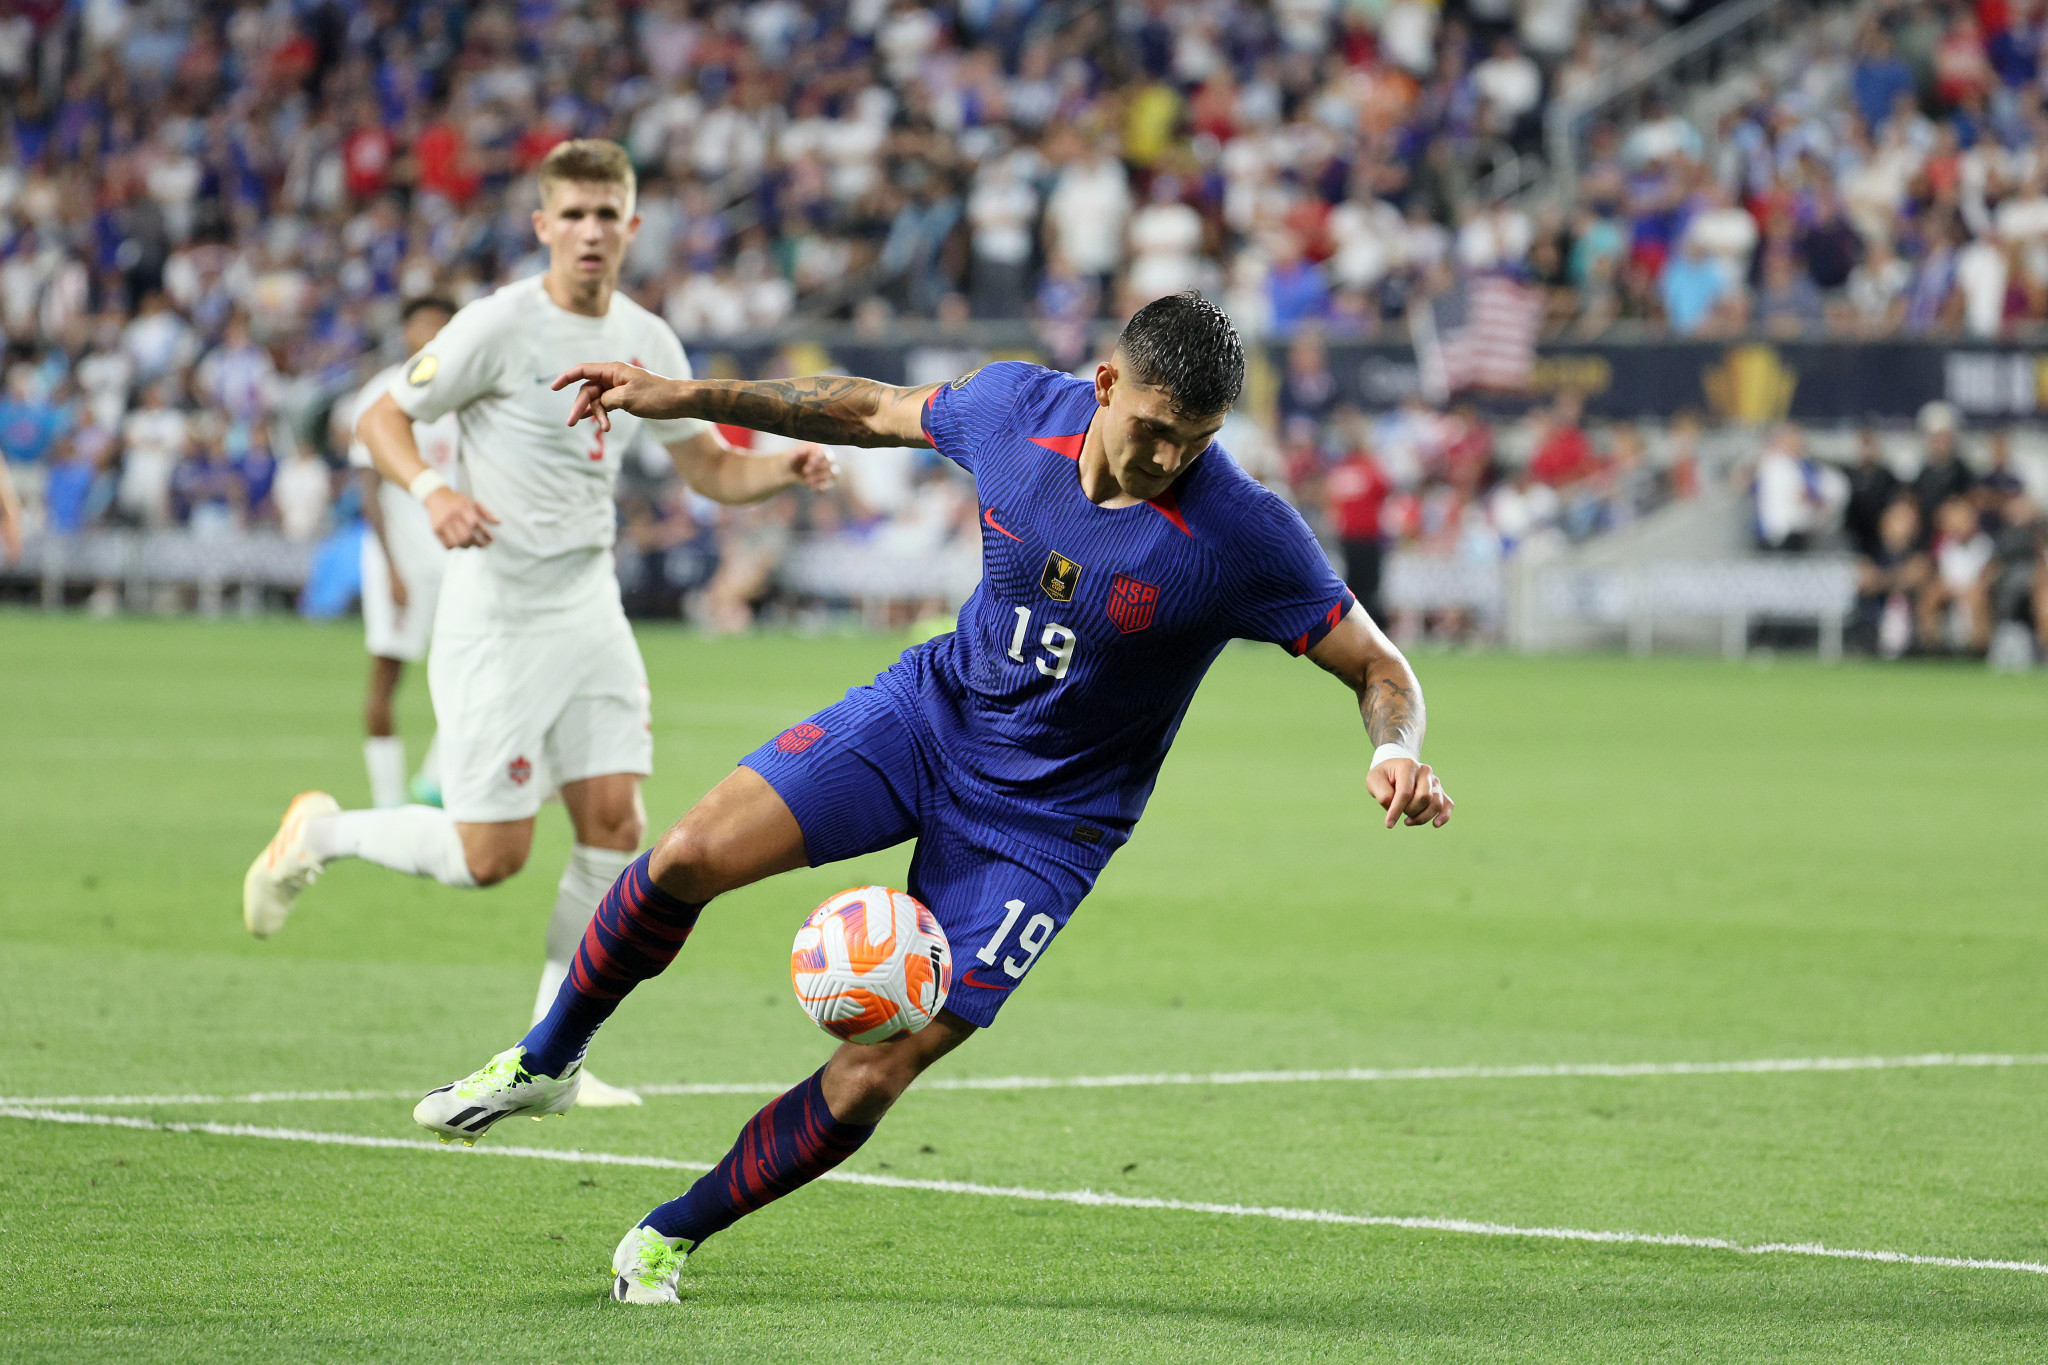 The United States Brandon Vázquez gave his side a late lead in the 88th minute before the eventual penalty shootout win ©Getty Images